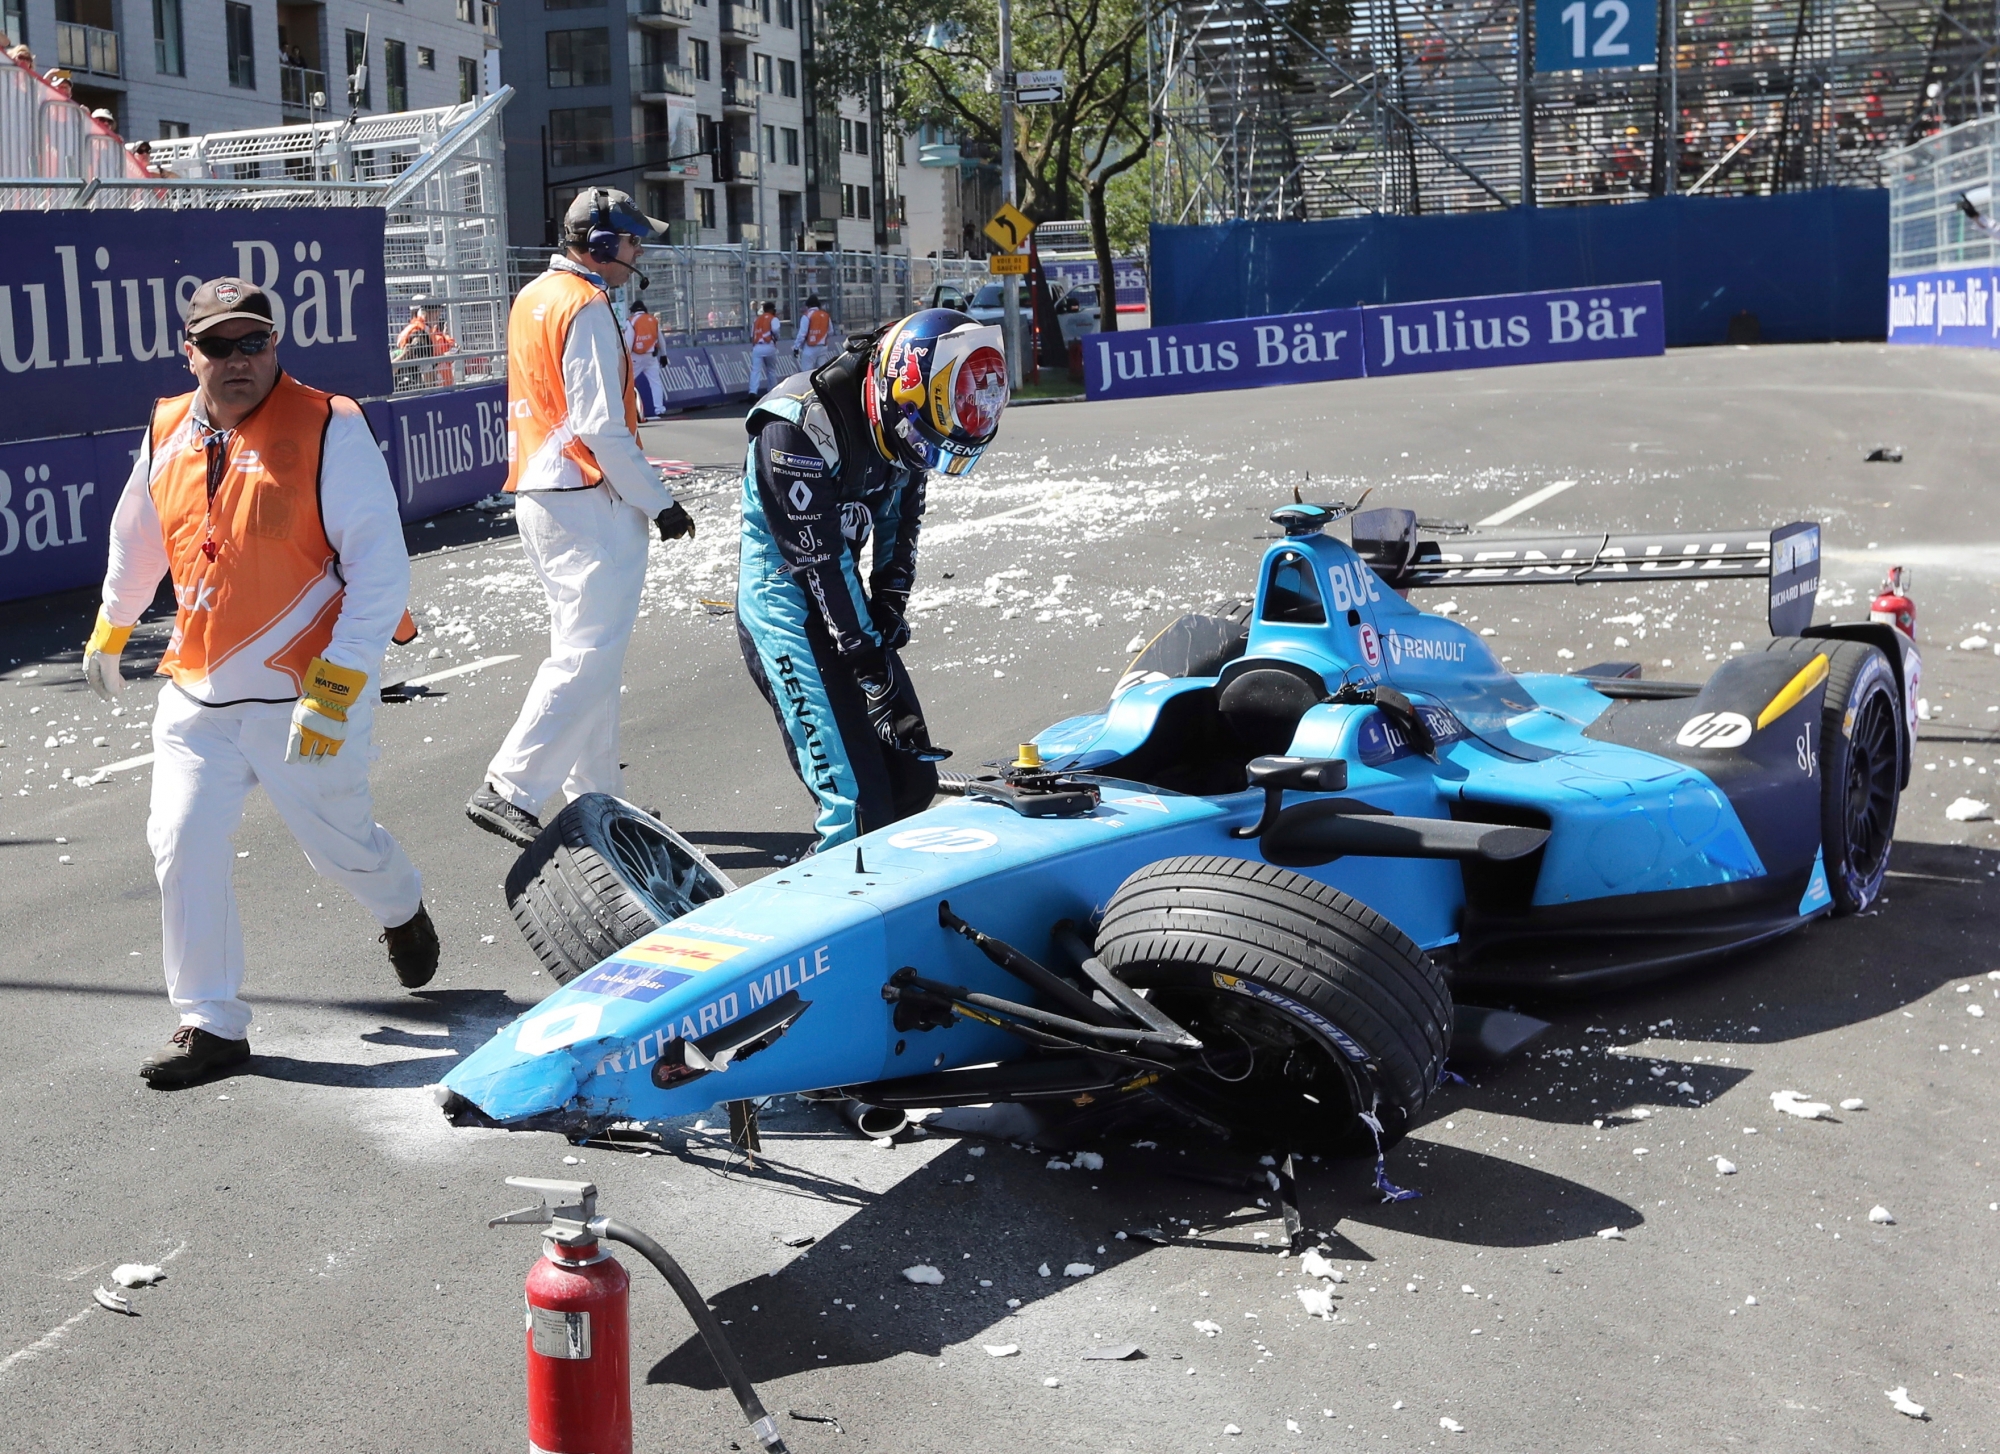 Sebastien Buemi, of Switzerland, checks the damage to his car after crashing during the second practice session at the Montreal Formula ePrix electric car race in Montreal on Saturday, July 29, 2017. (Tom Boland/The Canadian Press via AP) F1 Canada Formula E Auto Racing